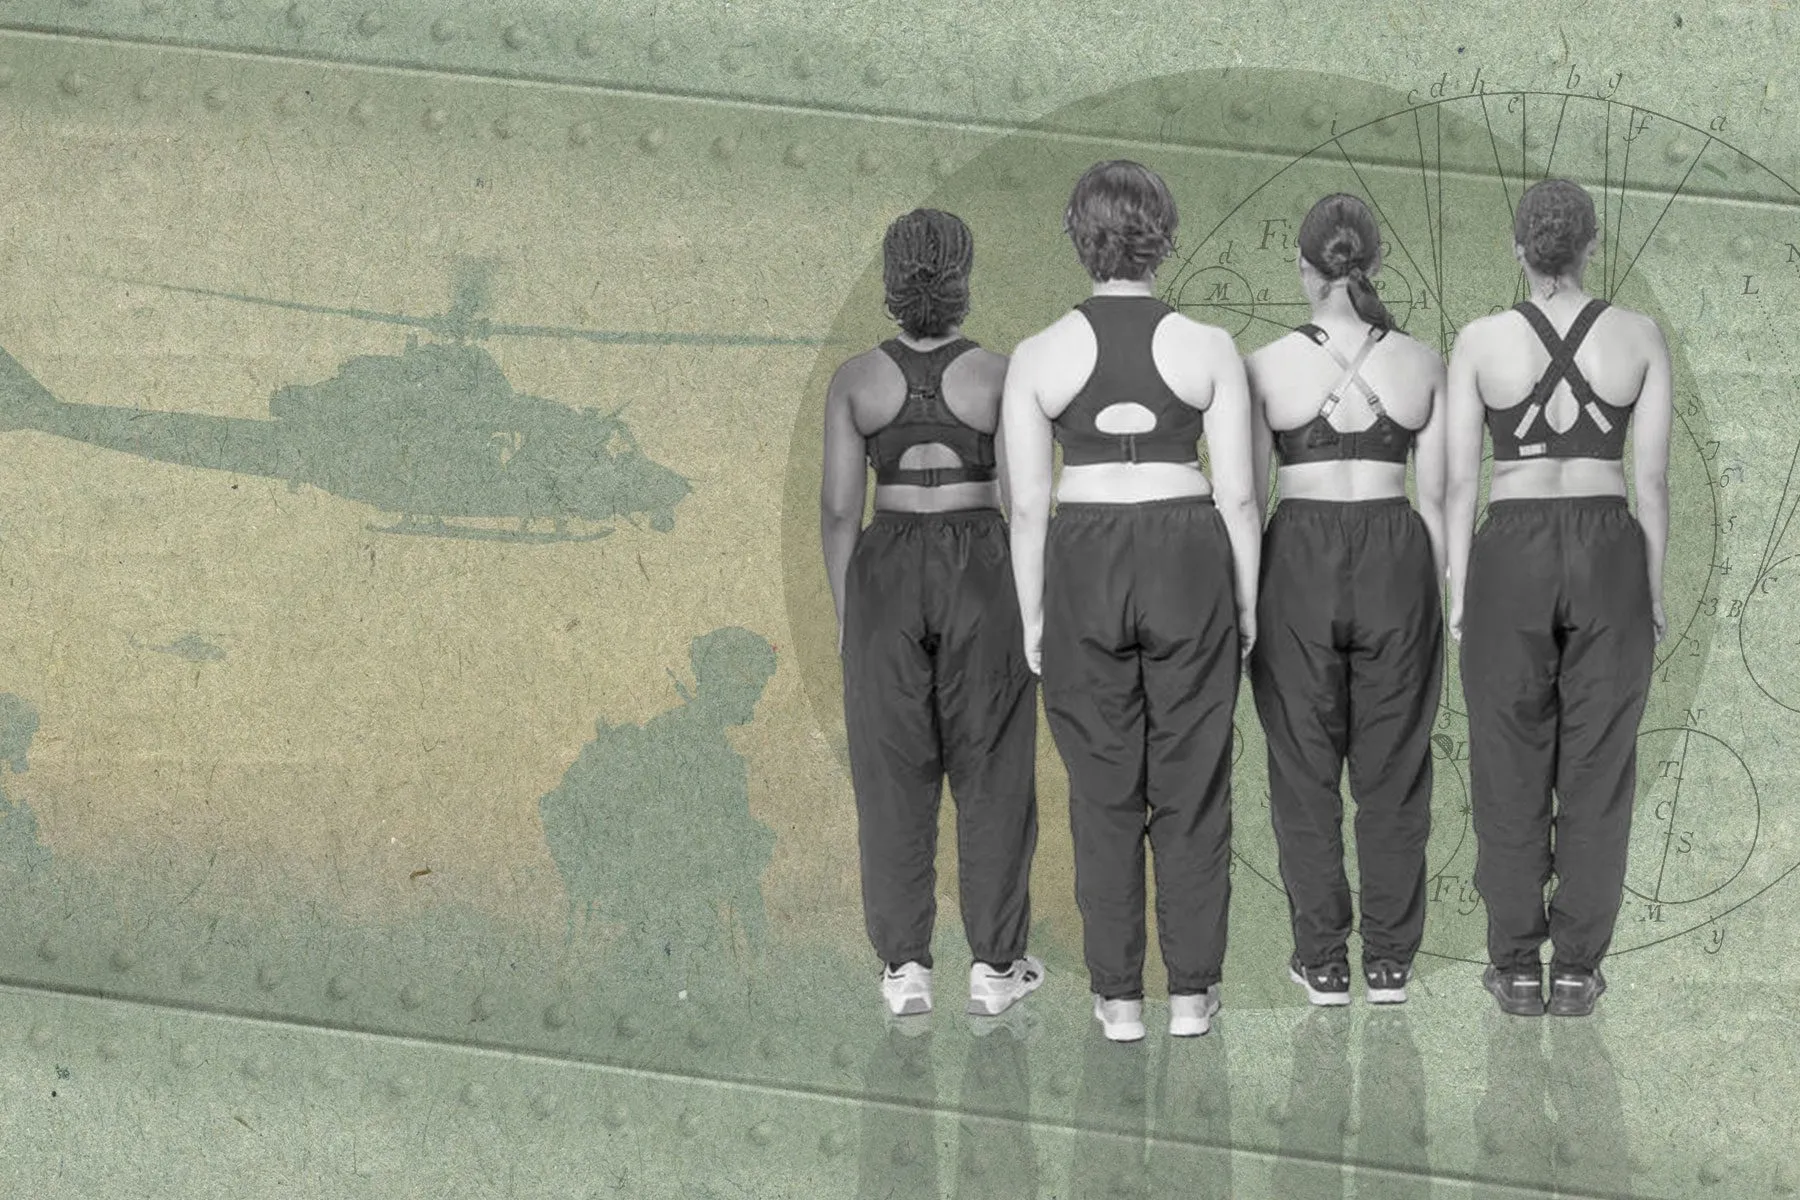 How womens military uniforms are evolving